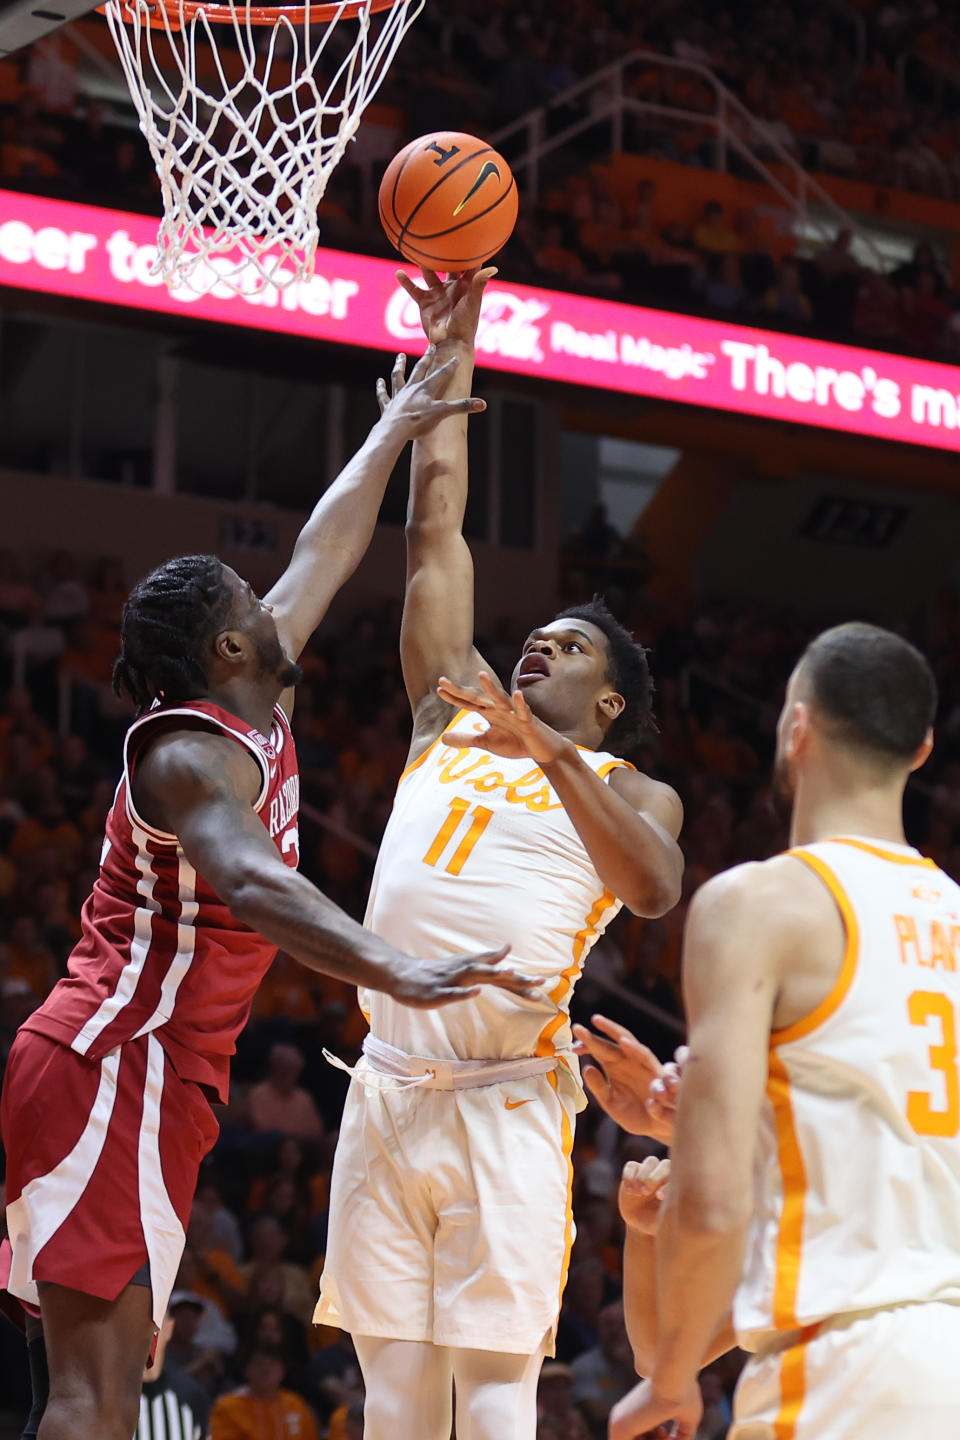 Feb 28, 2023; Knoxville, Tennessee, USA; Tennessee Volunteers forward Tobe Awaka (11) goes to the basket against the Arkansas Razorbacks during the first half at Thompson-Boling Arena. Mandatory Credit: Randy Sartin-USA TODAY Sports